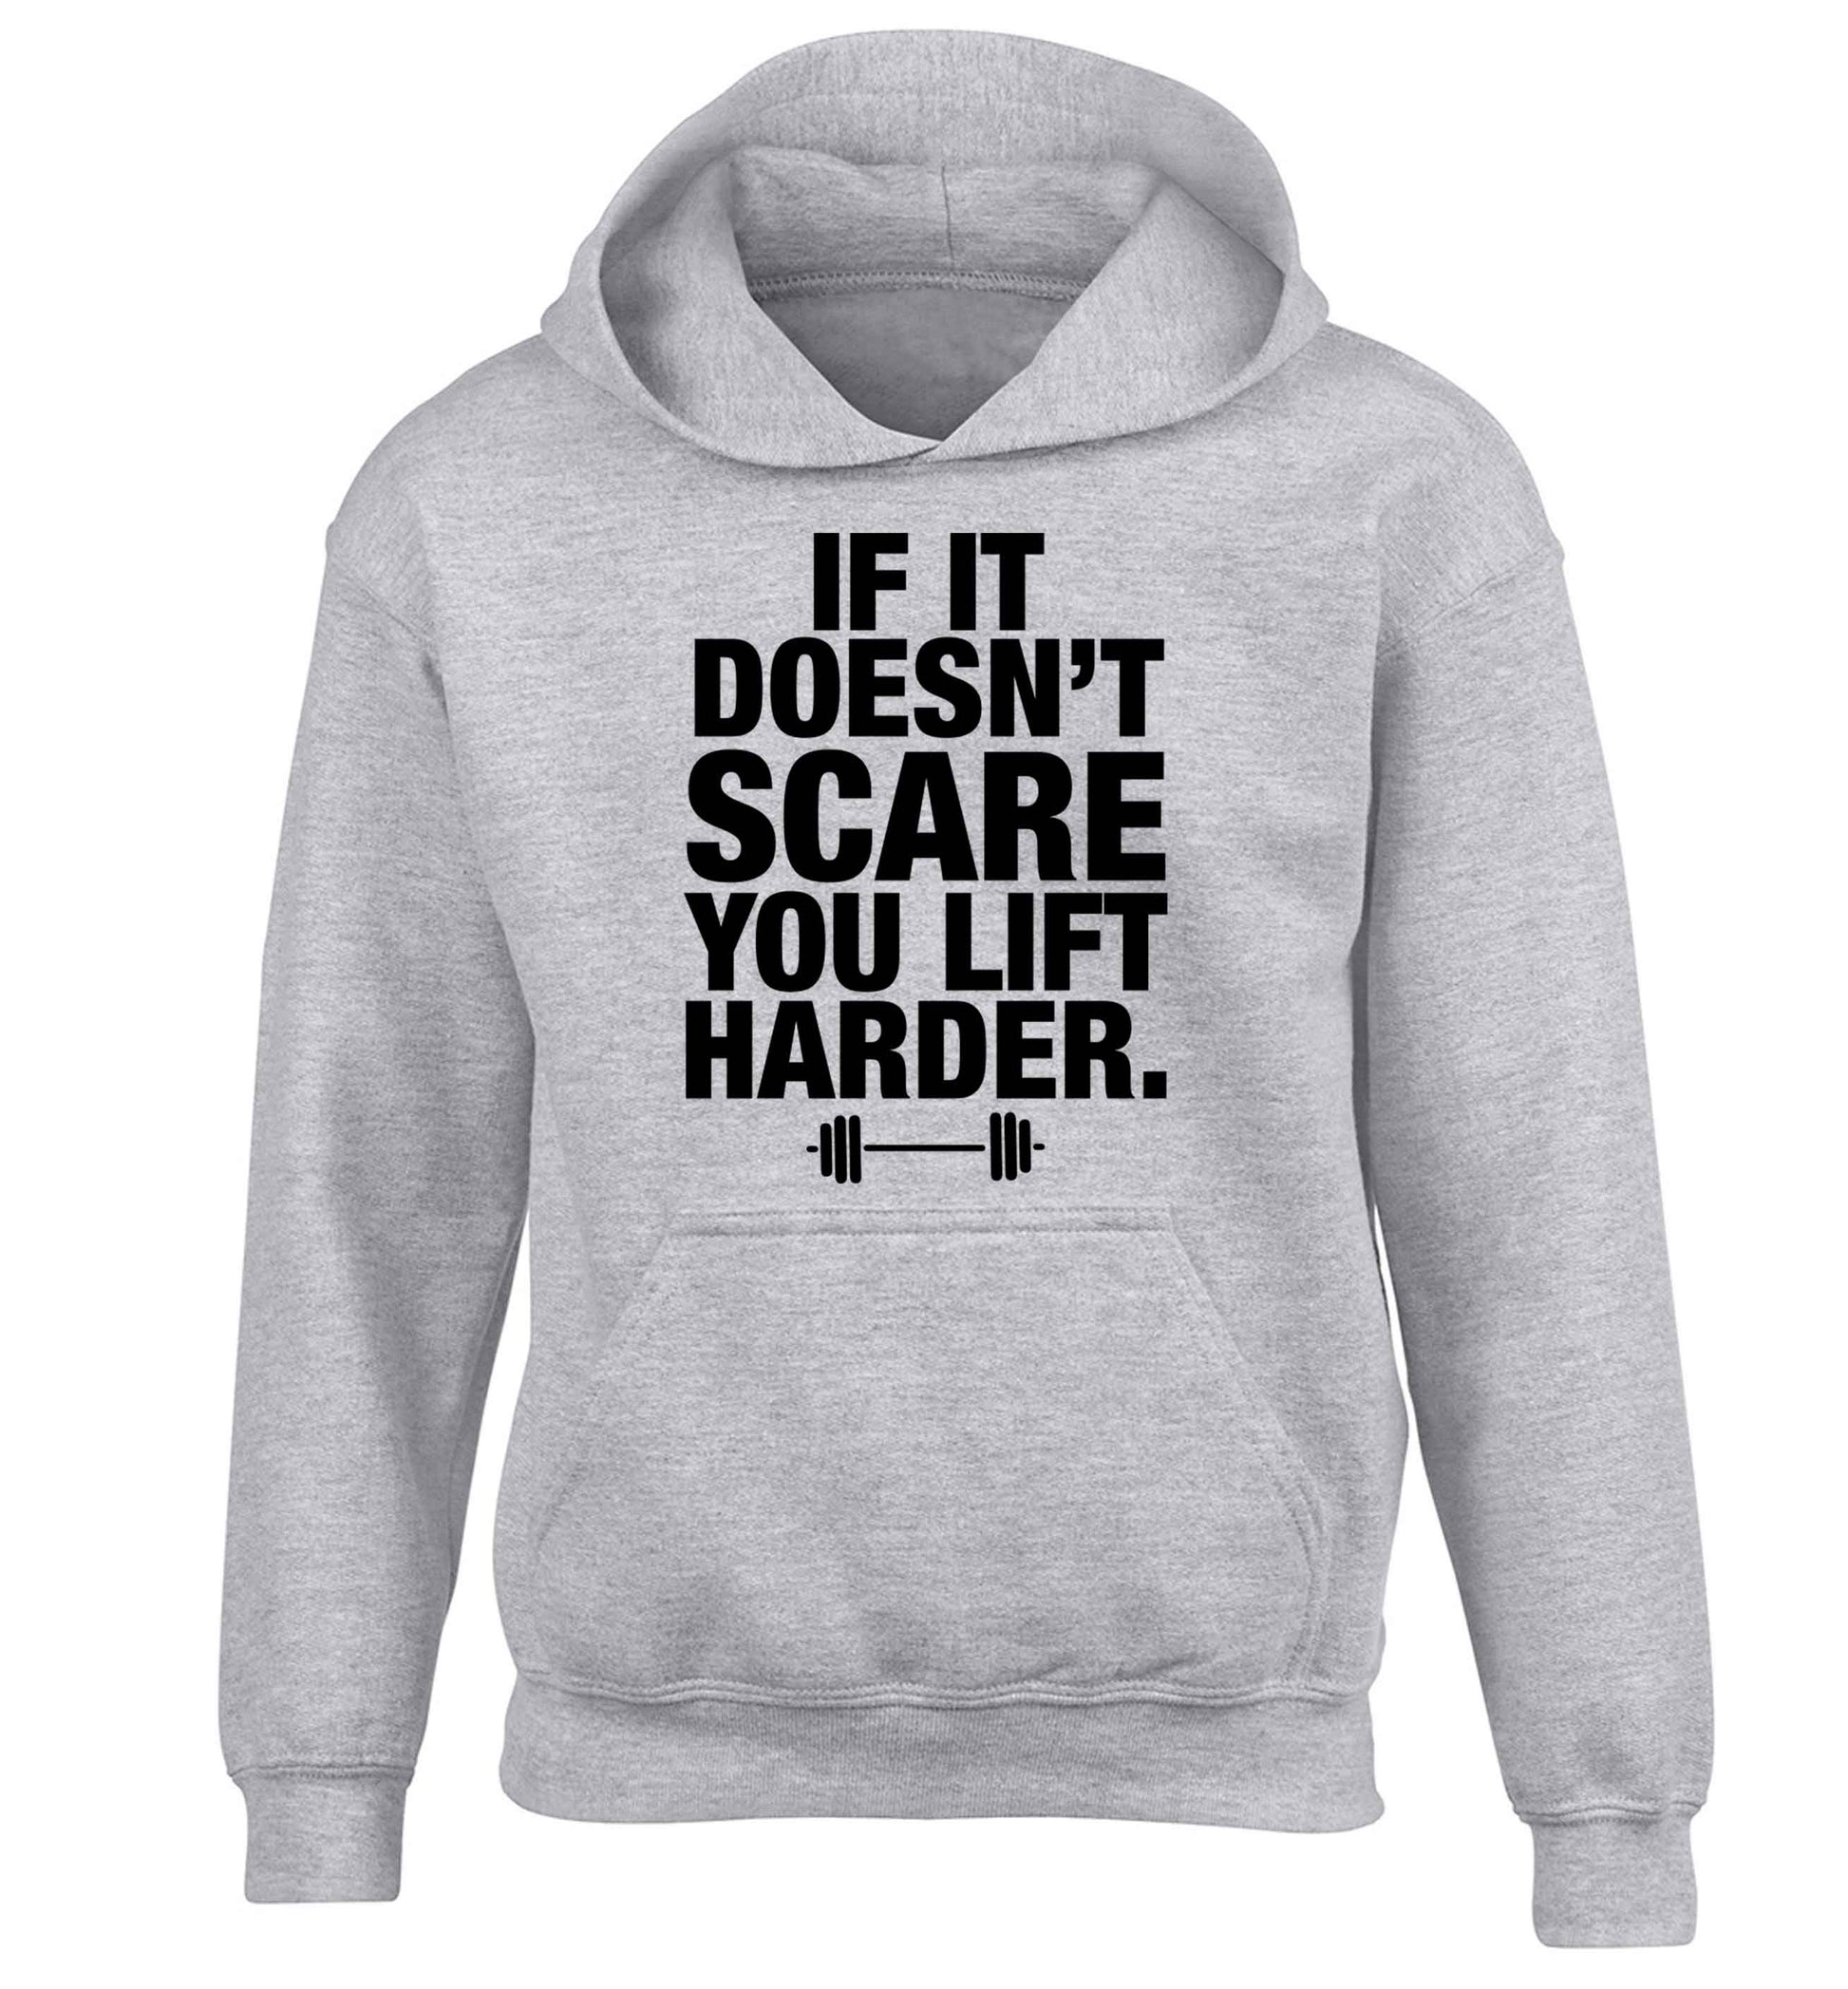 If it doesnt' scare you lift harder children's grey hoodie 12-13 Years